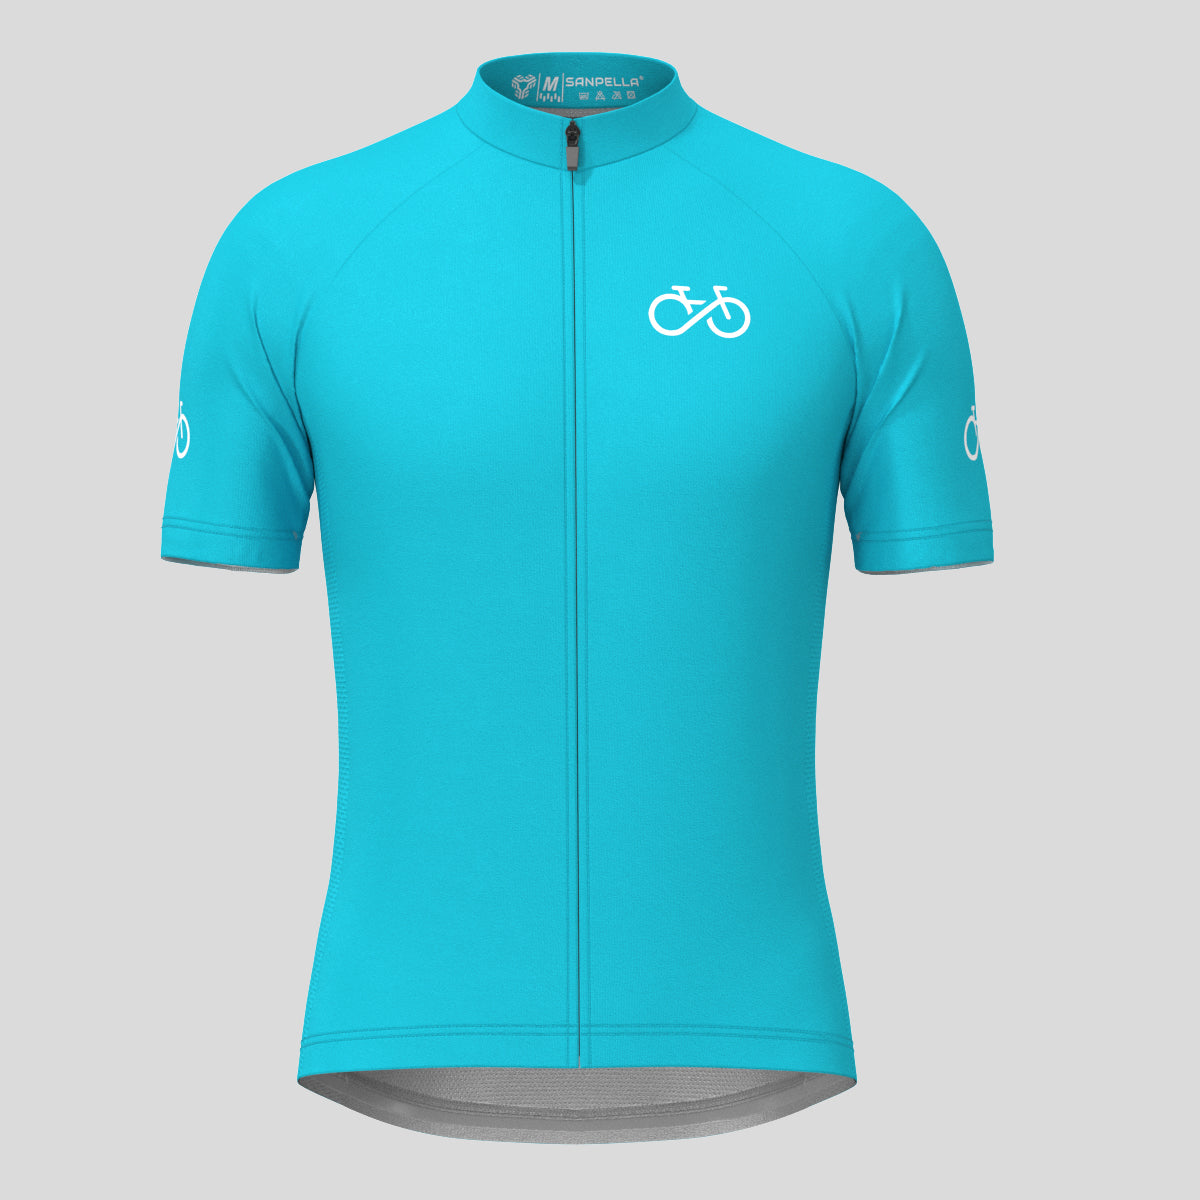 Ride Forever Men's Cycling Jersey -Ocean